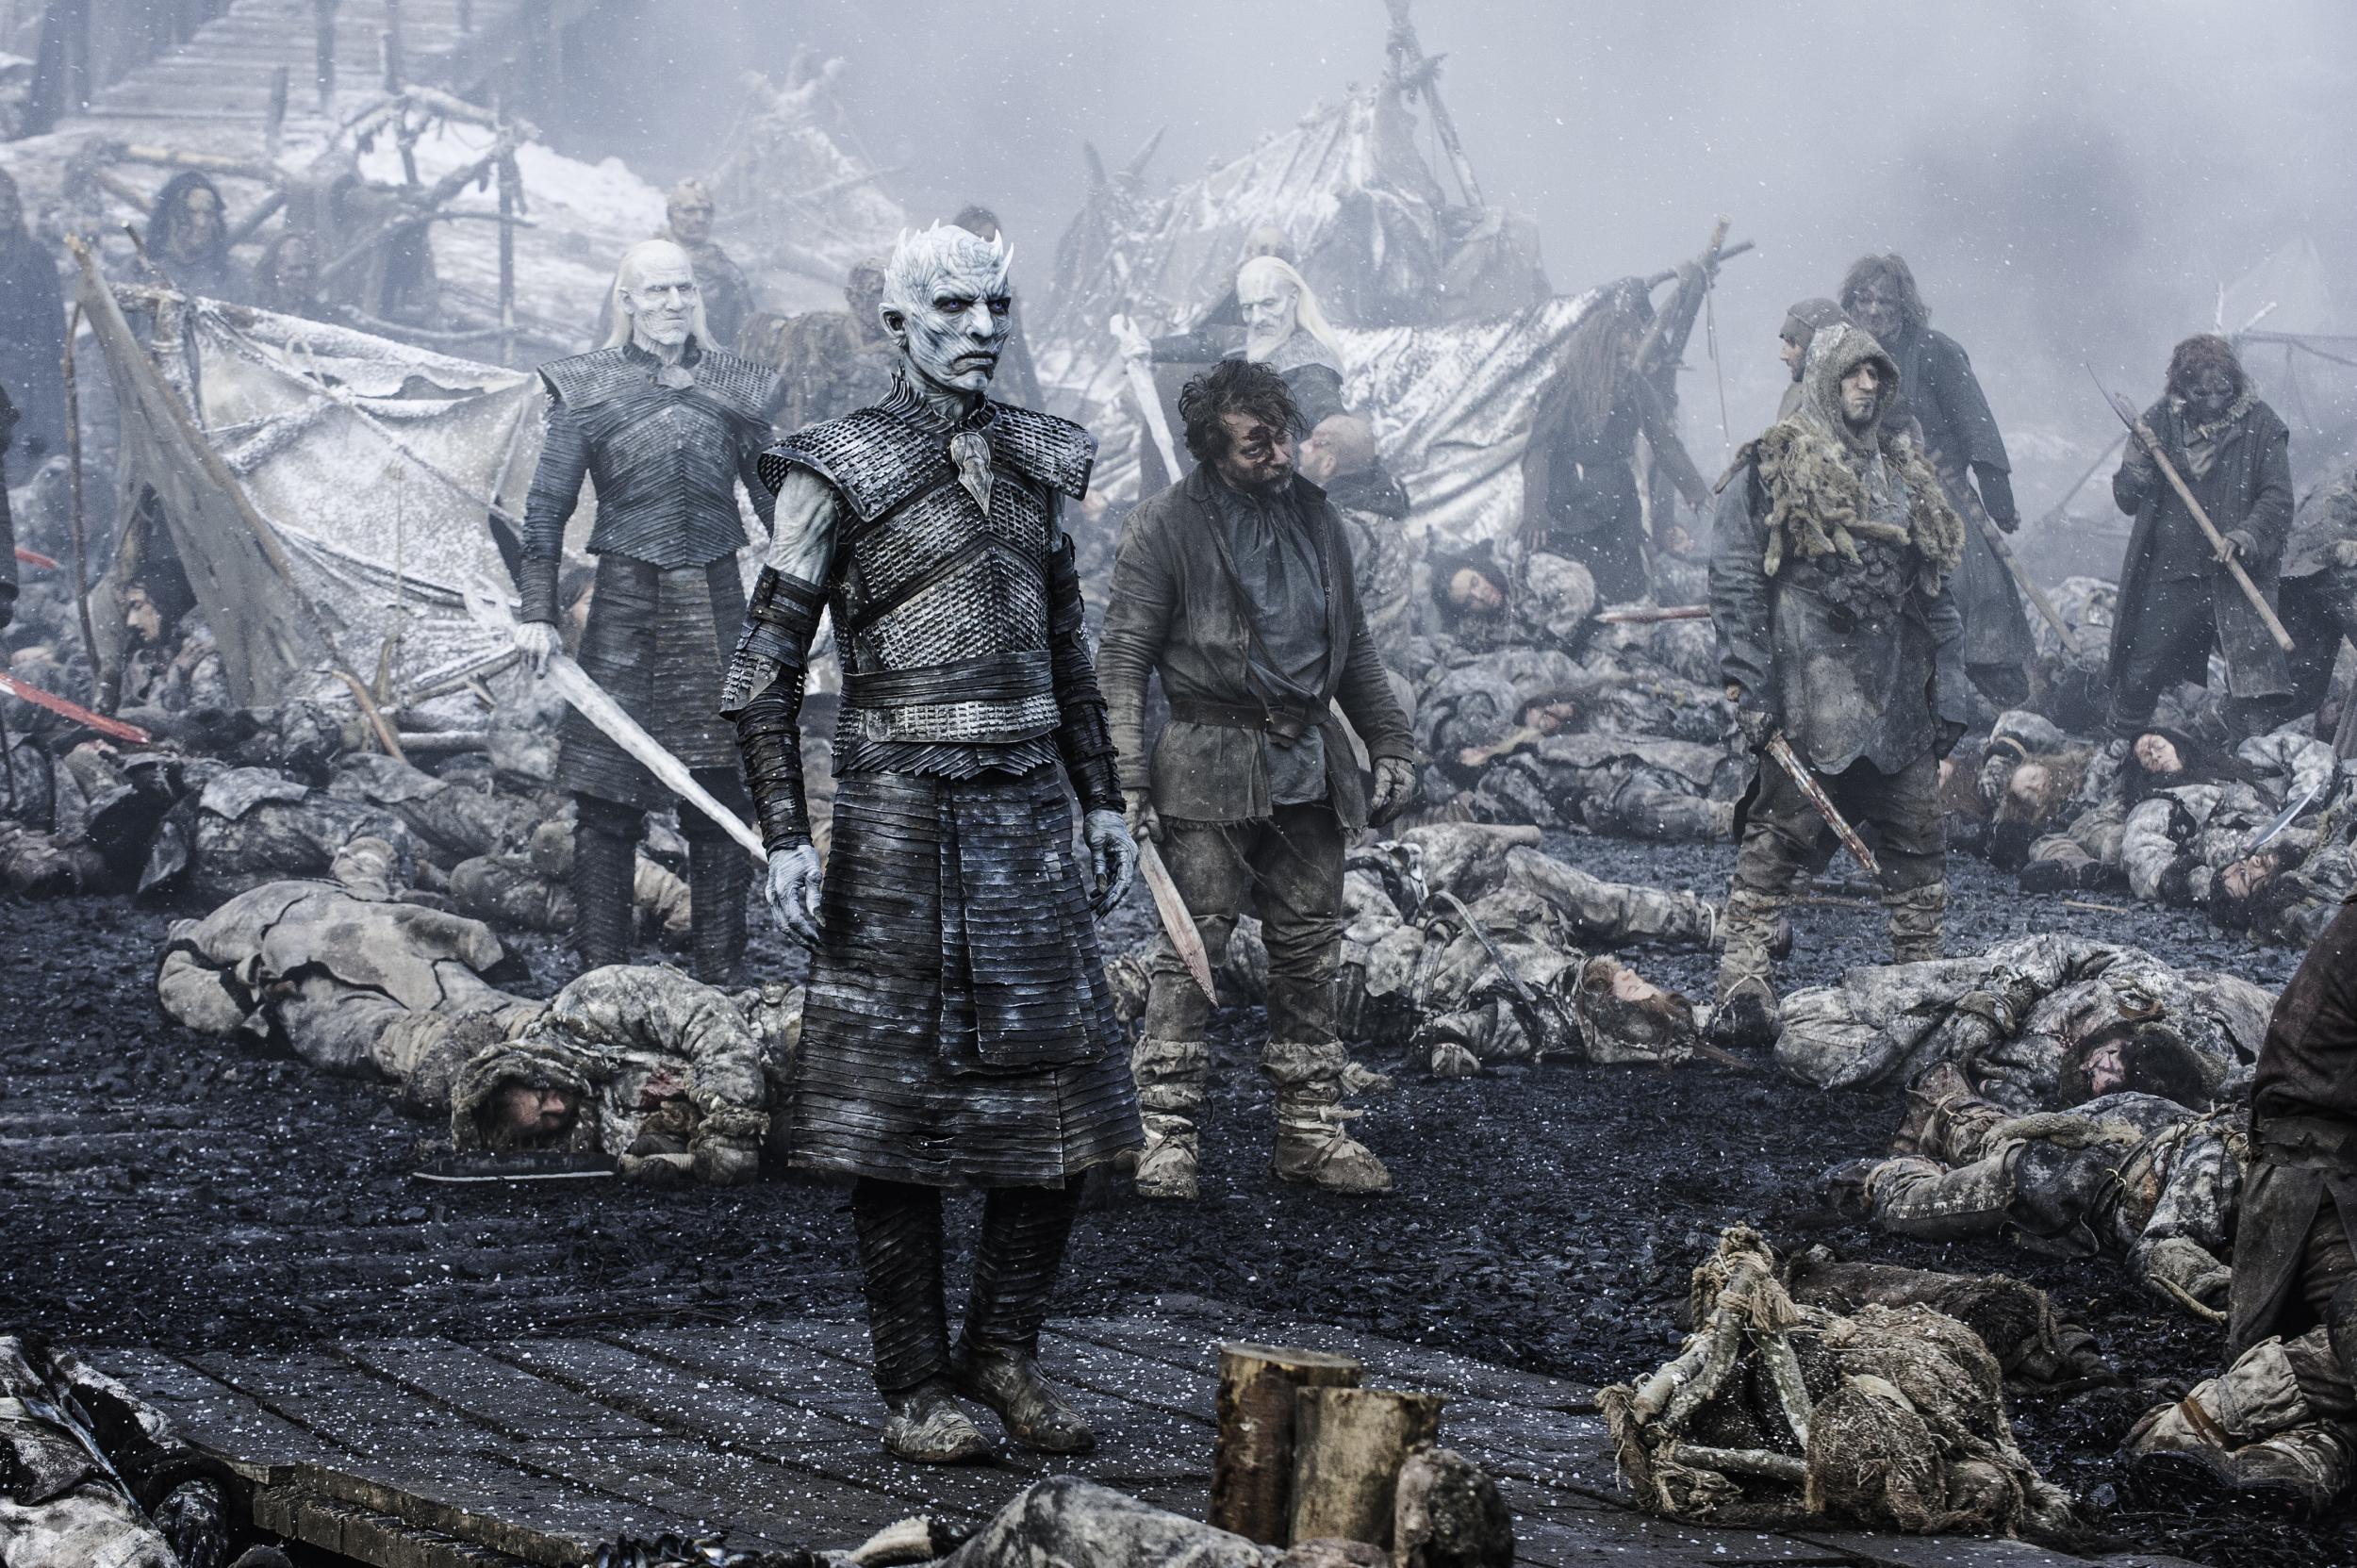 Wallpapers TV show Game Of Thrones White Walkers on the desktop